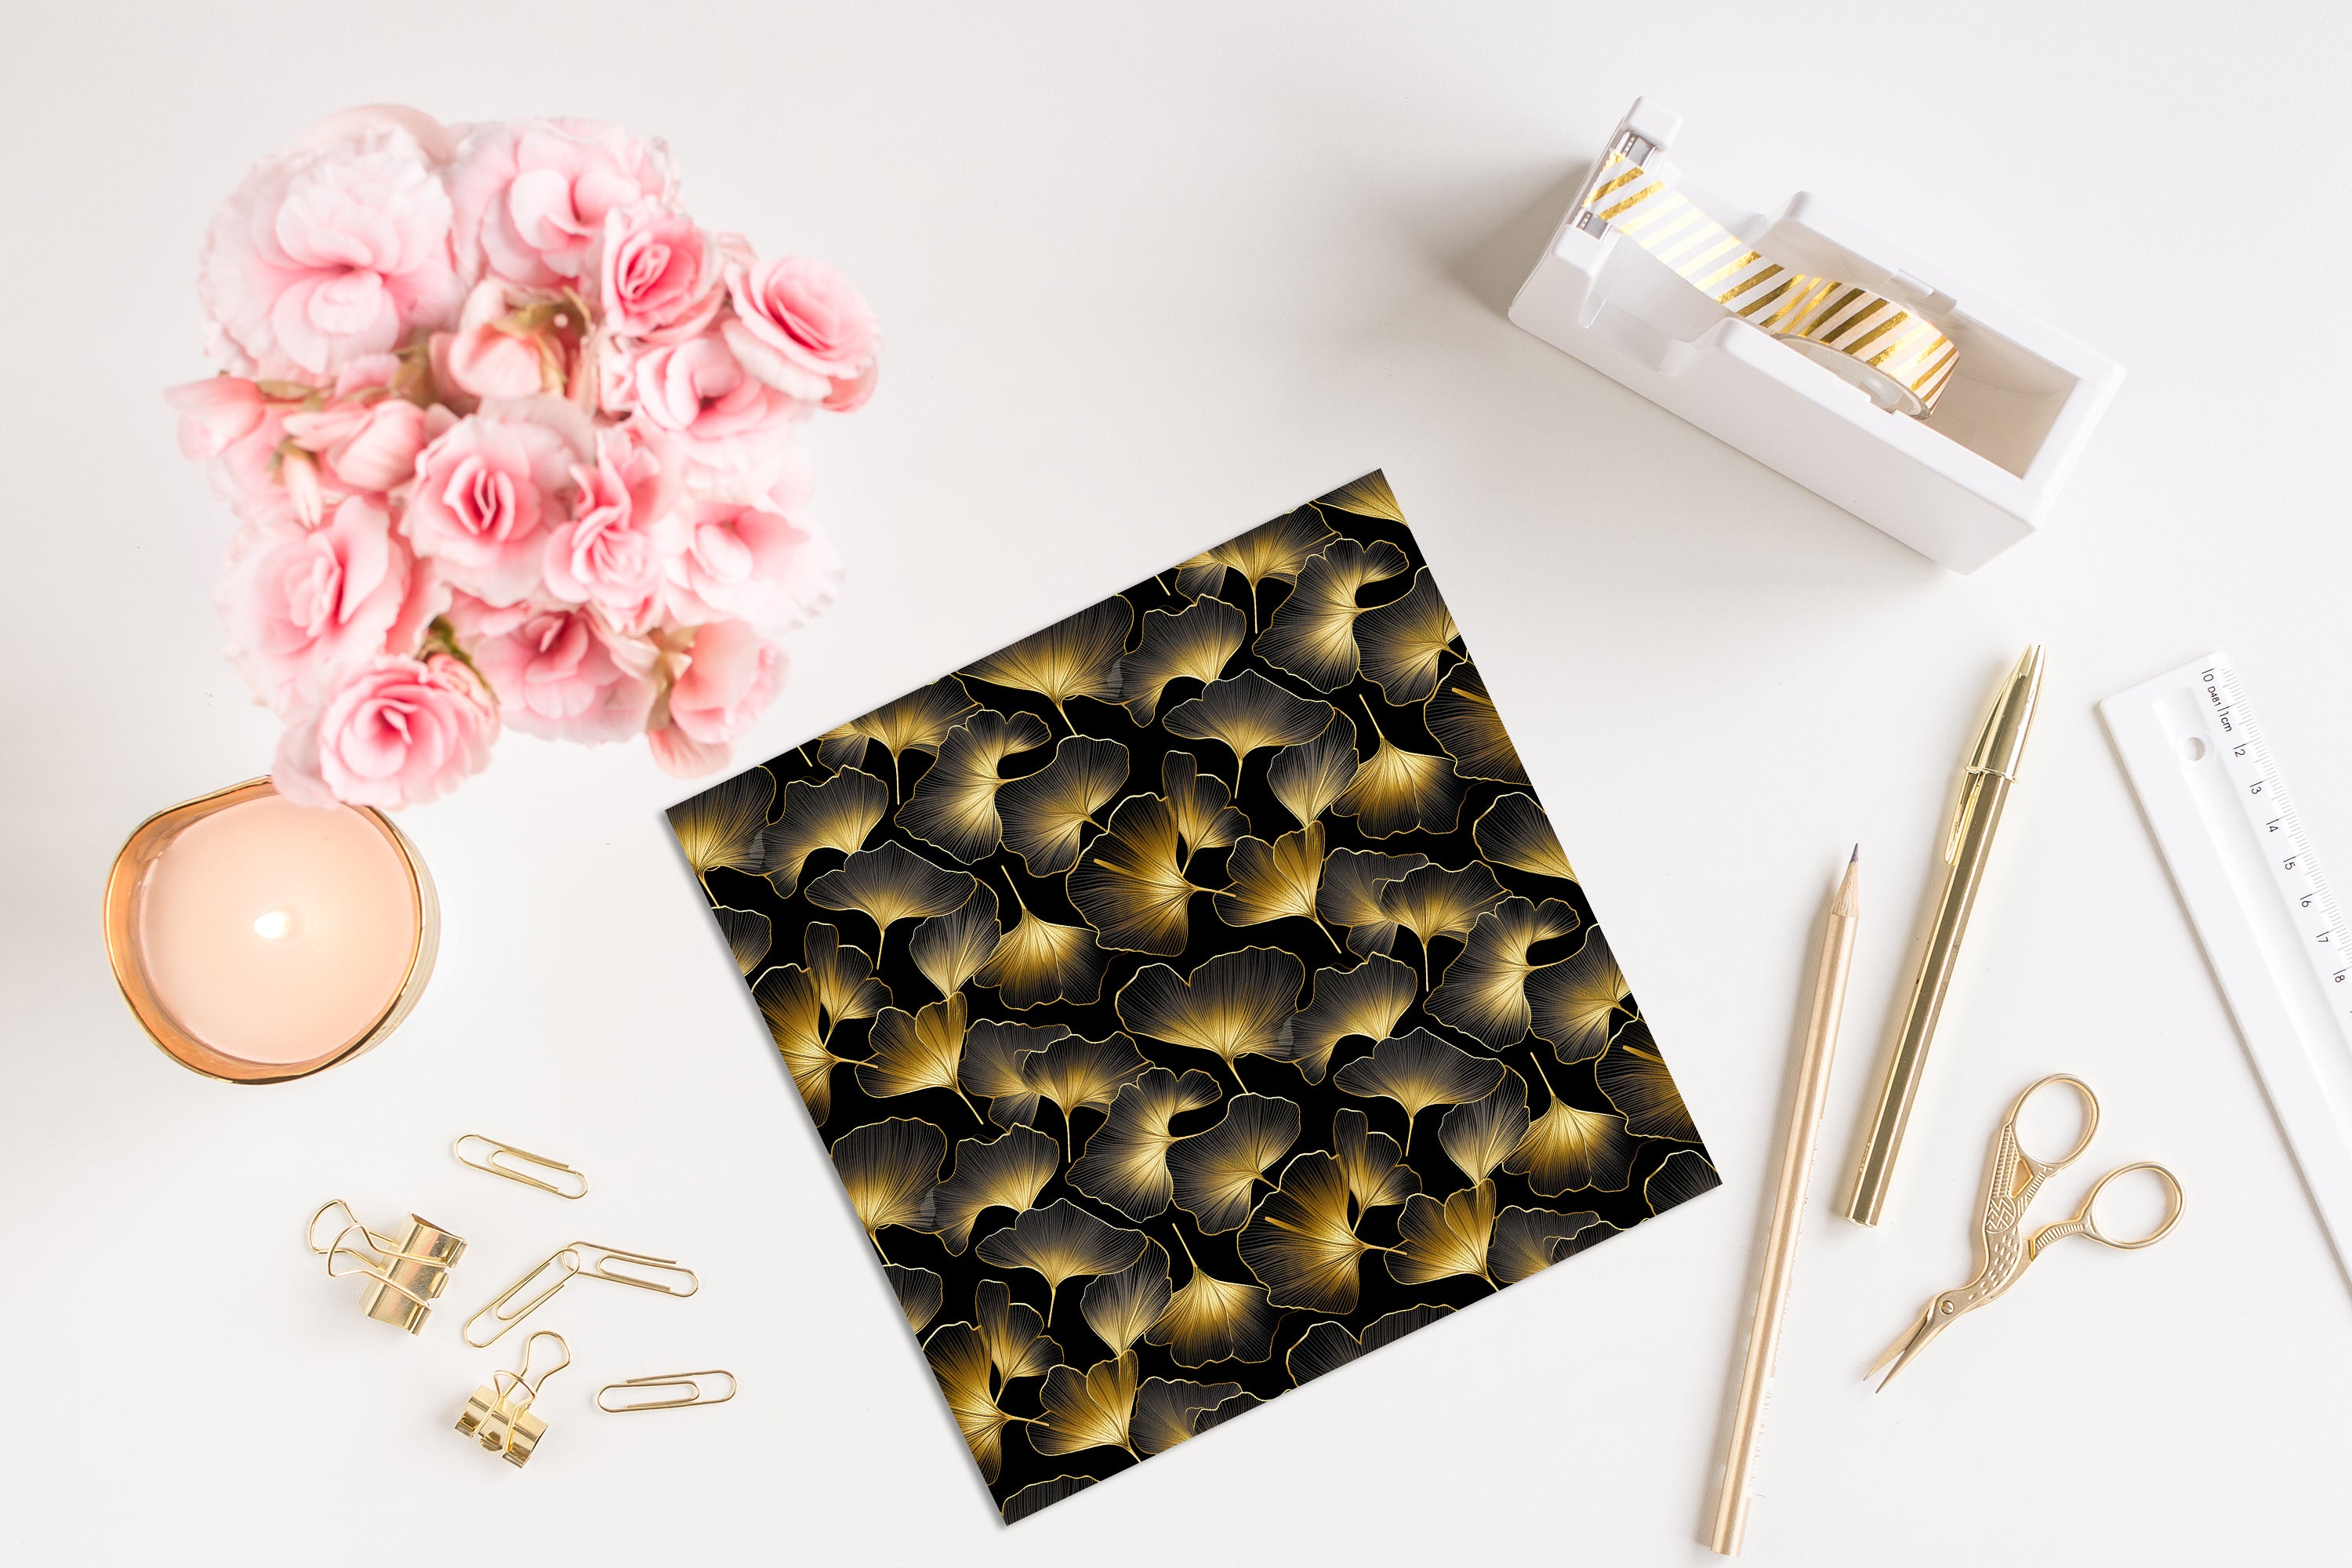 16 Seamless Black and Gold Ginkgo Leaves Digital Papers